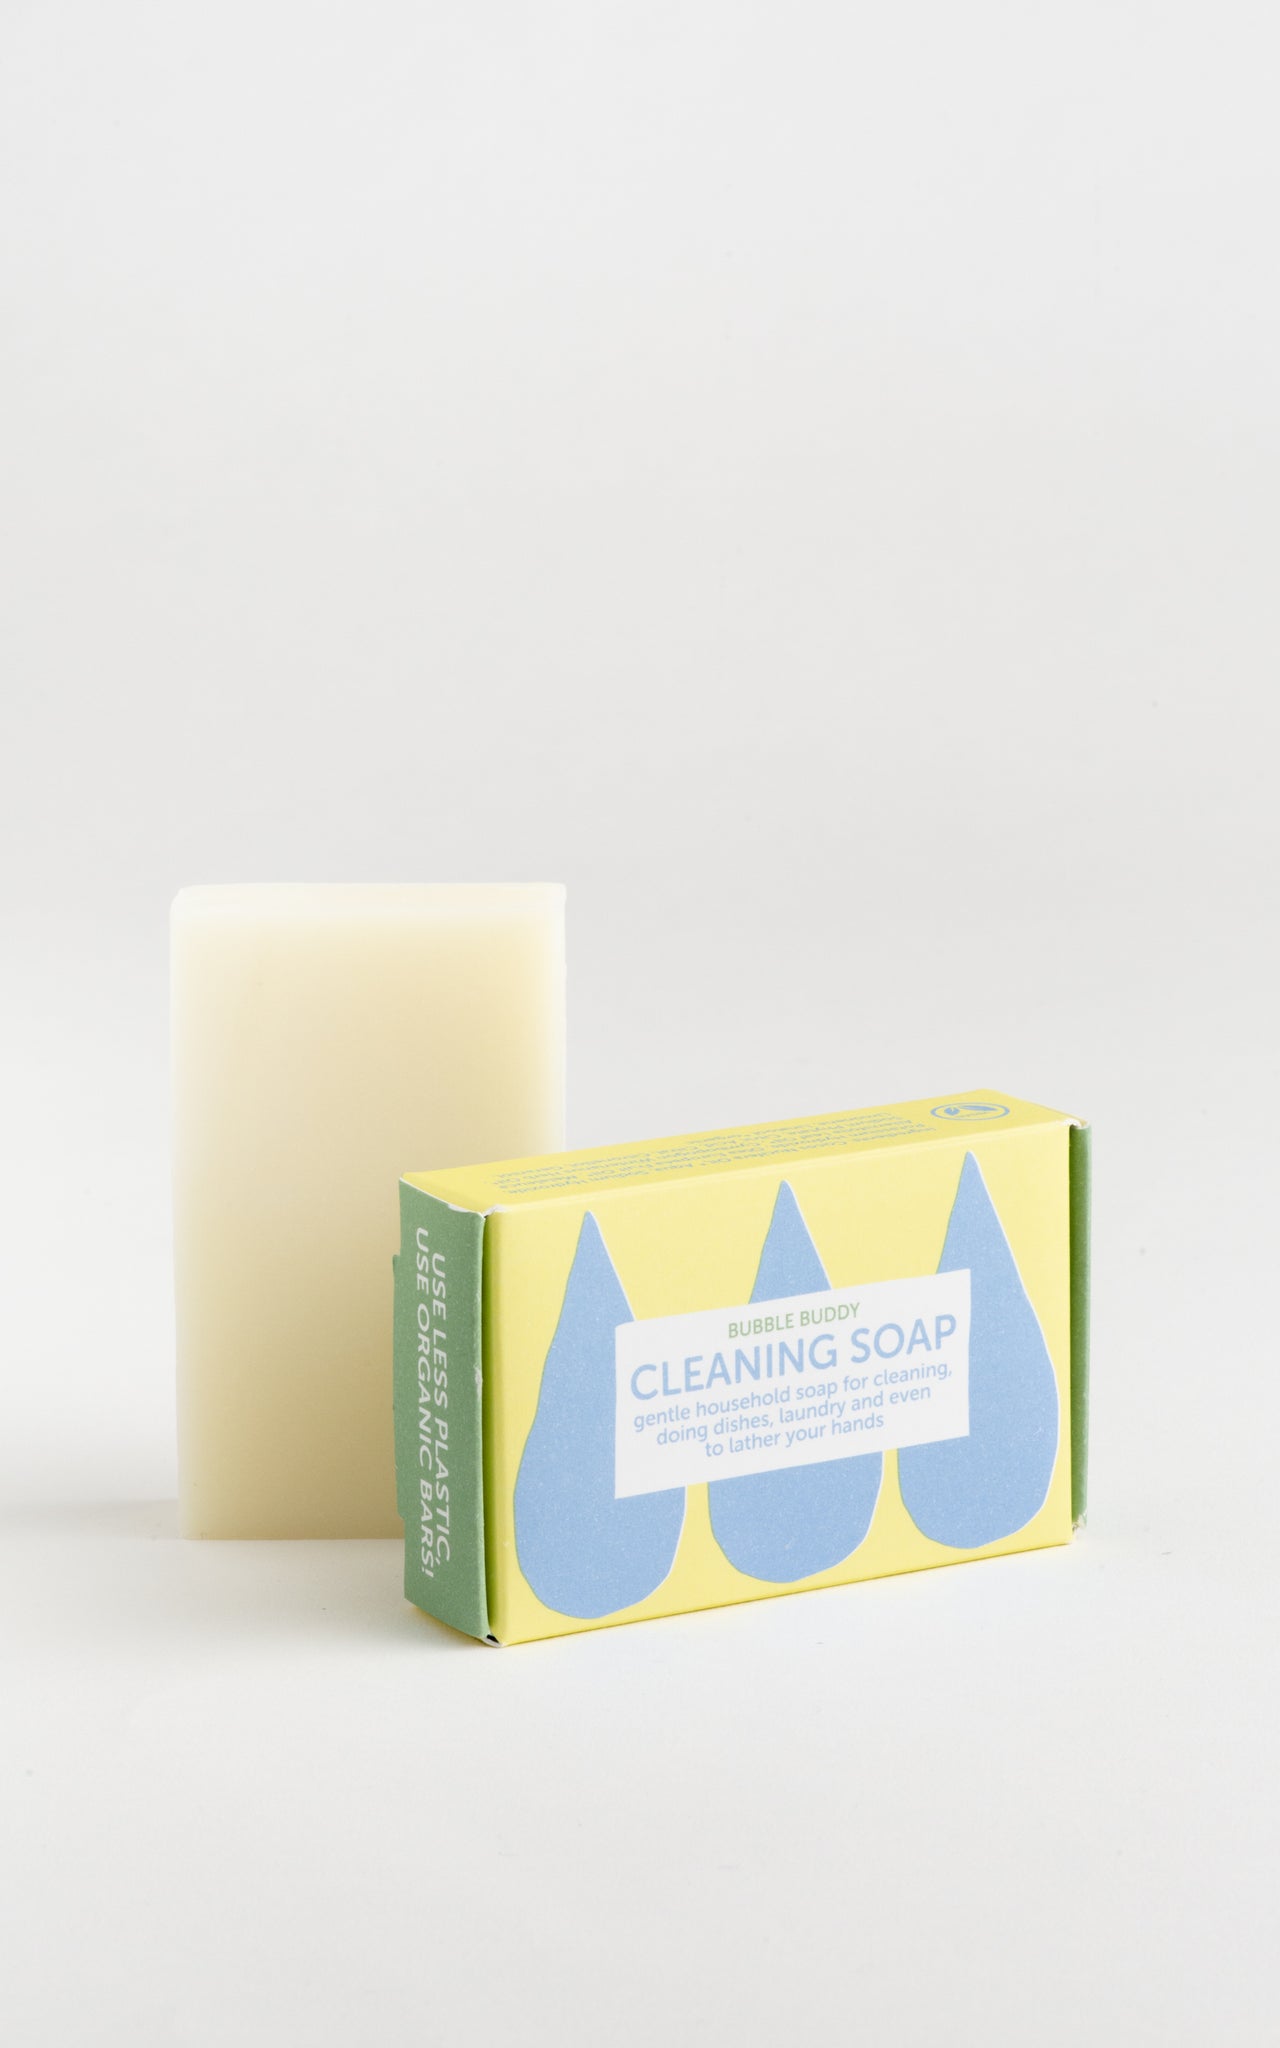 Organic Domestic Cleaning Soap